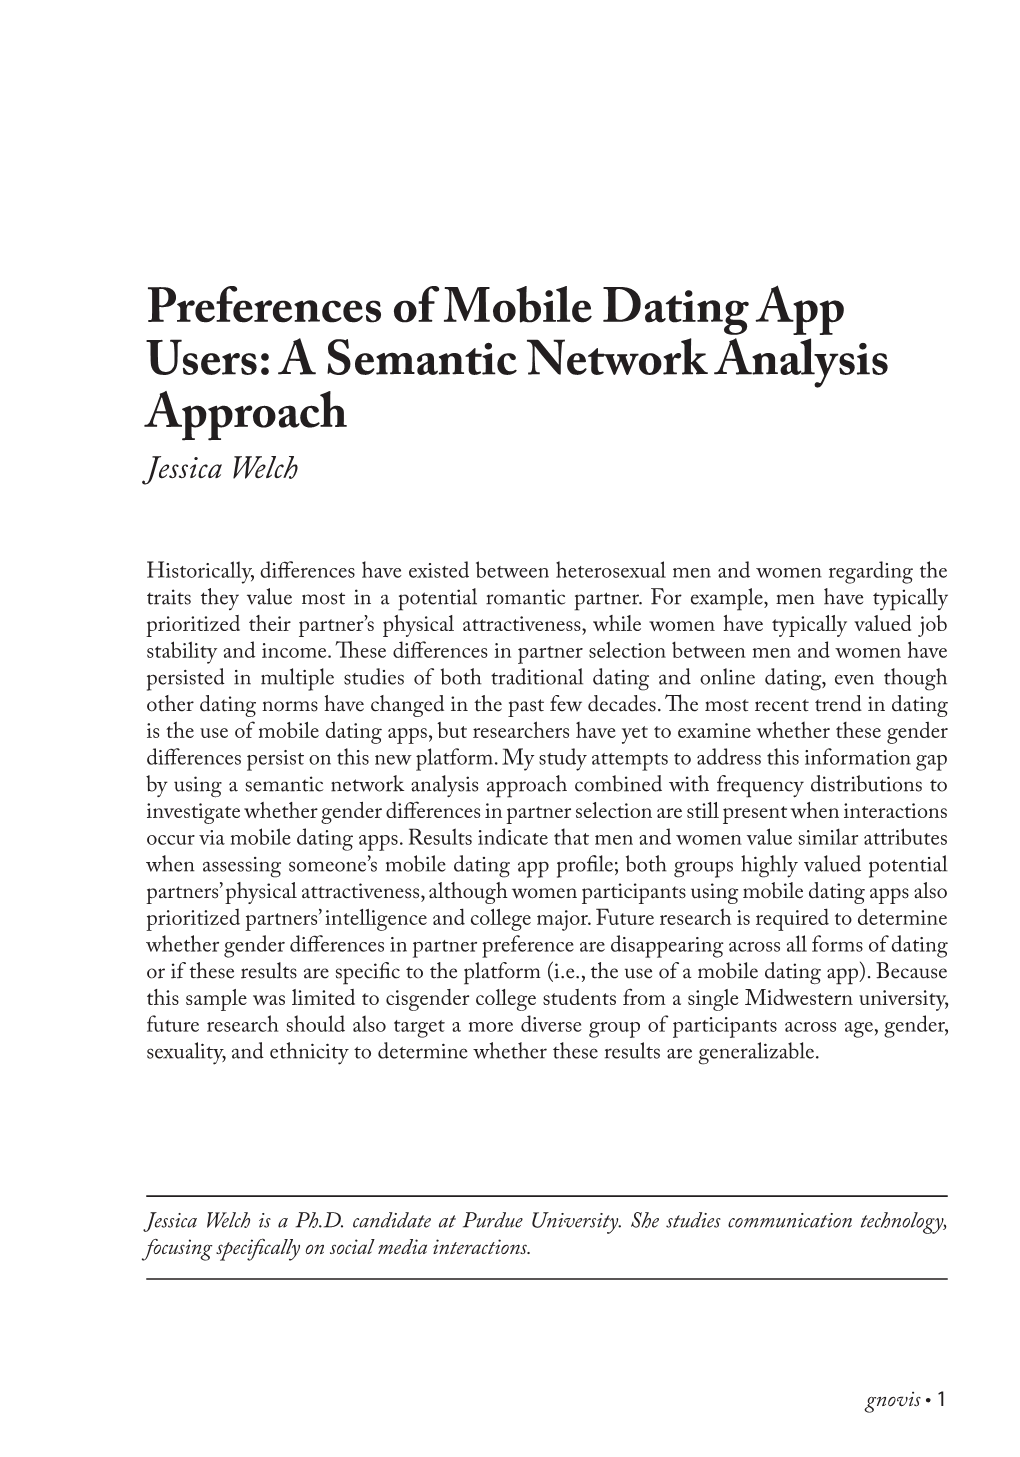 Preferences of Mobile Dating App Users: a Semantic Network Analysis Approach Jessica Welch